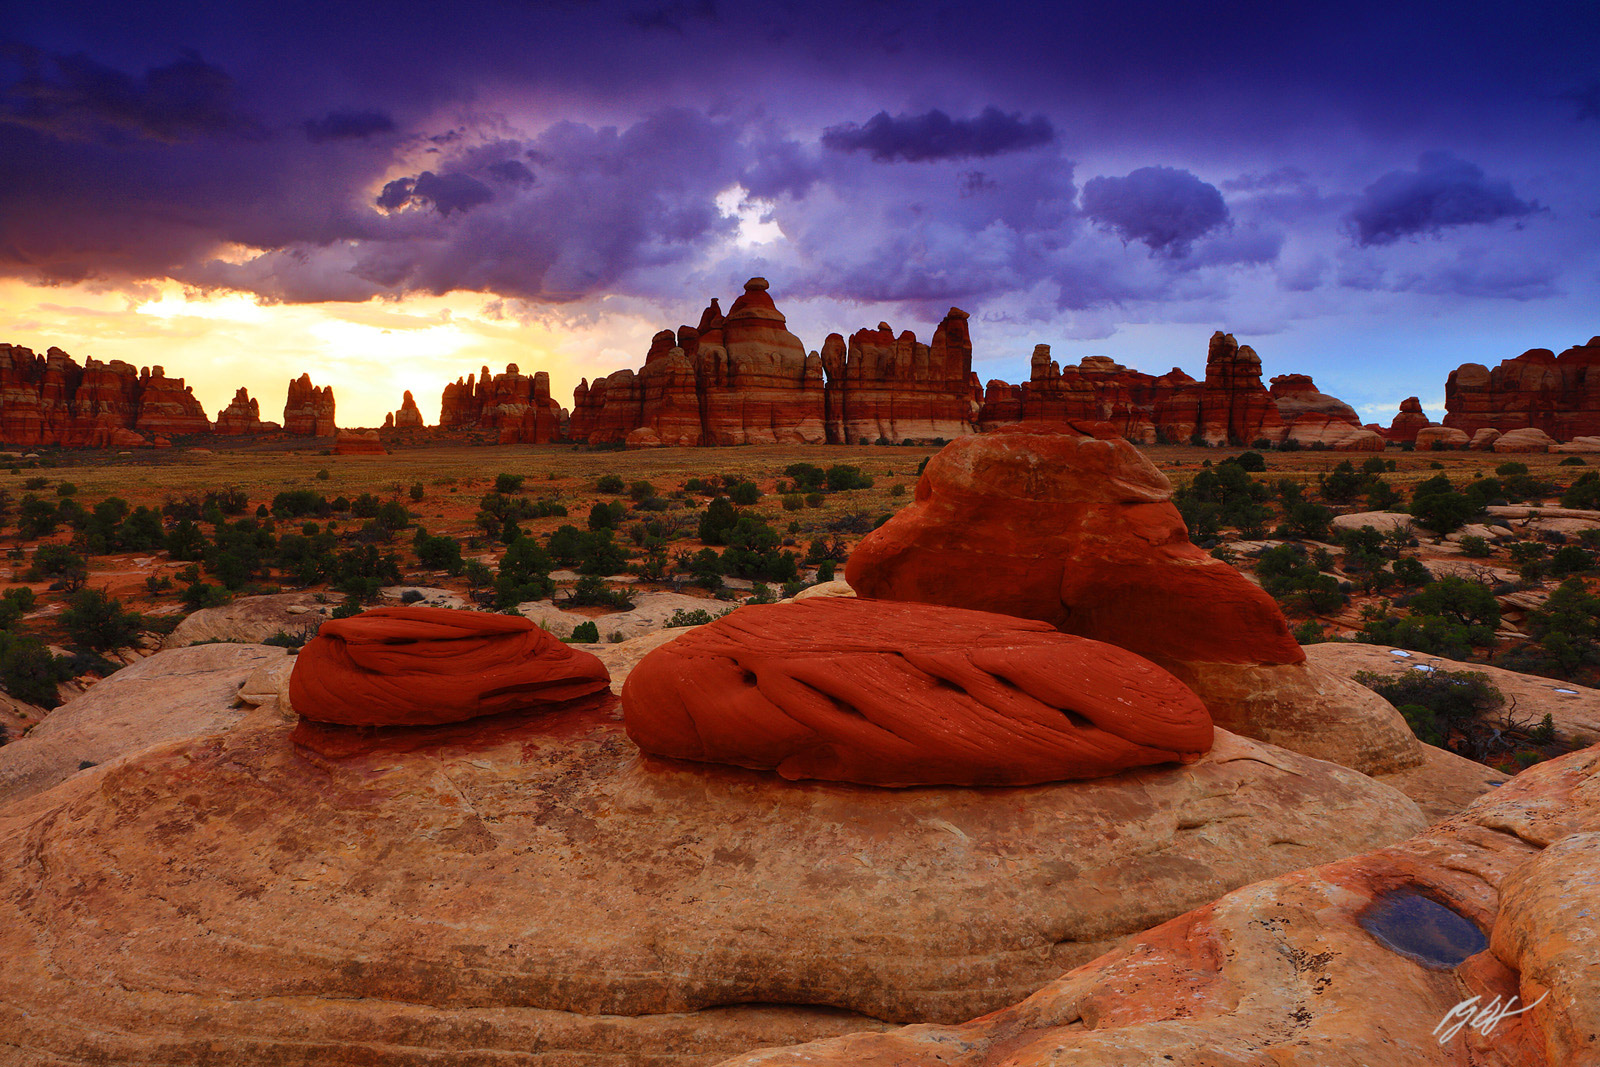 Sun Sneak under a Thunderstorm at Sunset in Chesler Park in Canyonlands National Park in Utah